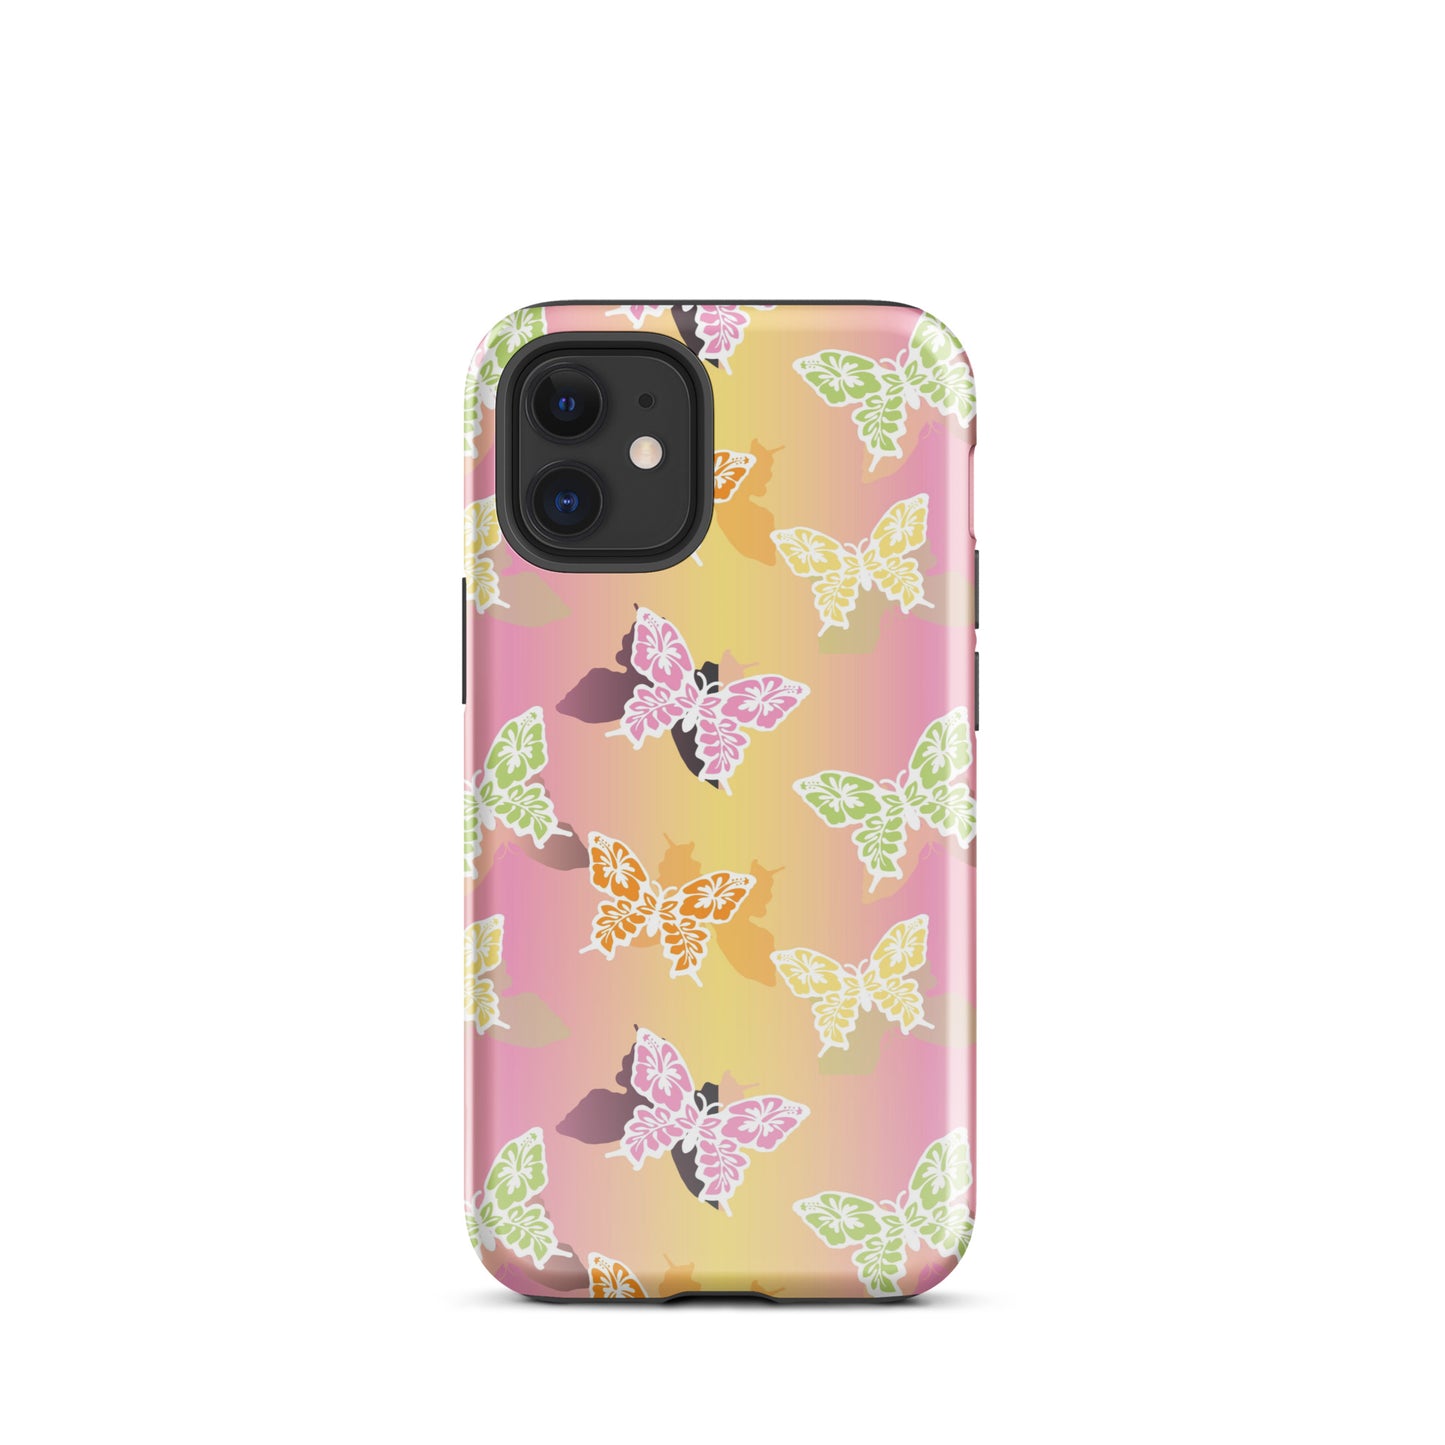 Butterfly Gradient iPhone Case Glossy iPhone 12 mini